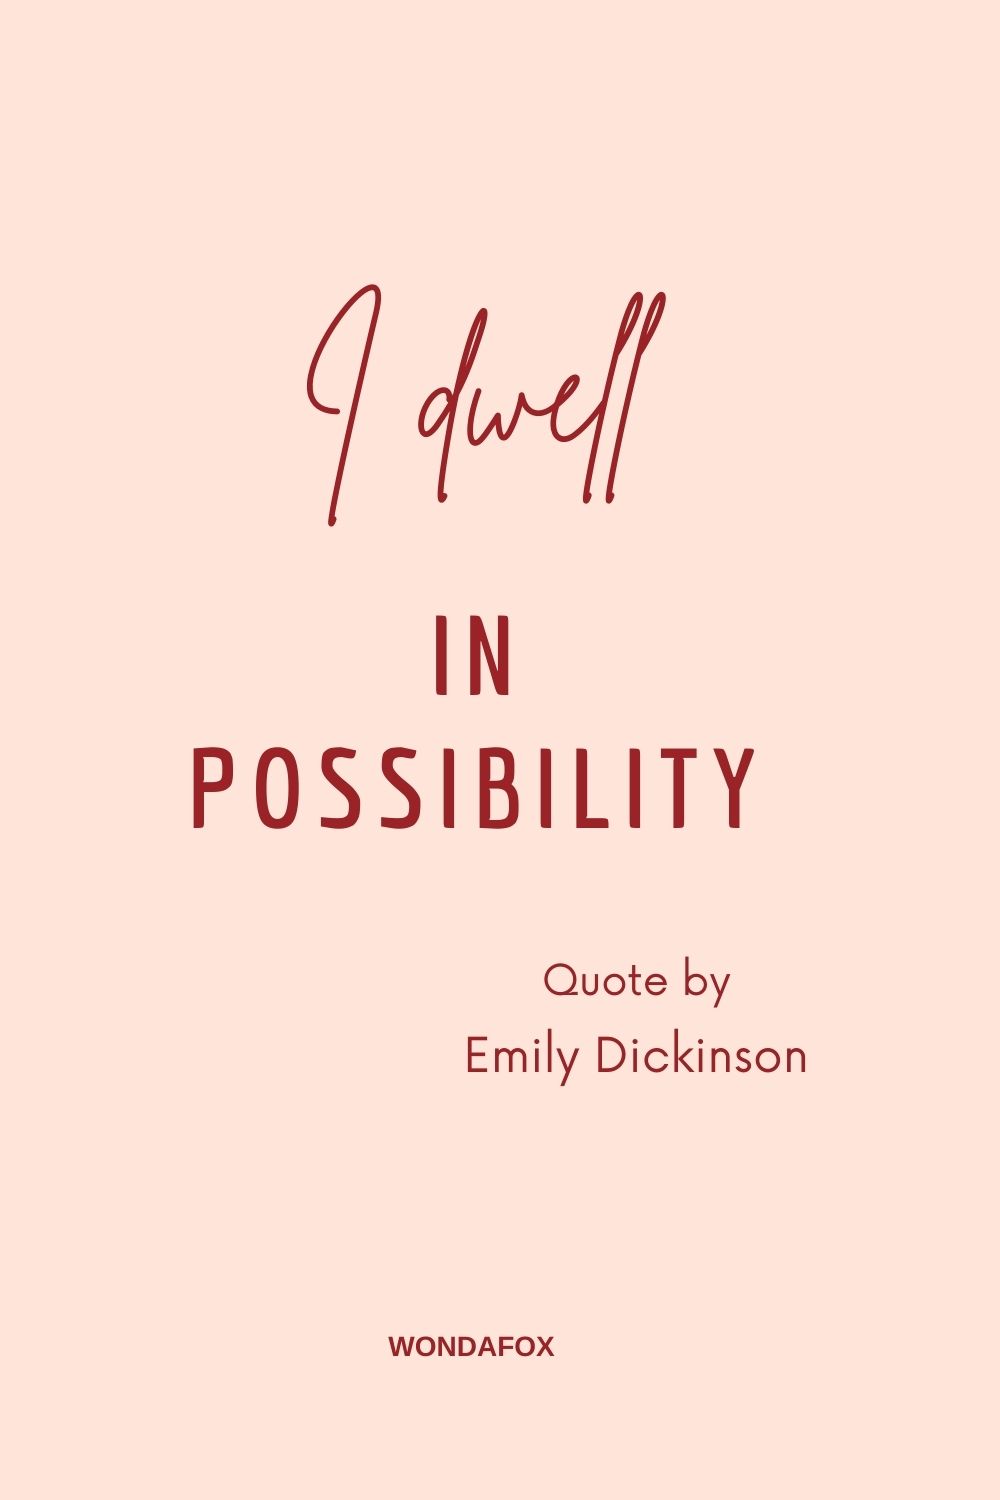 “I dwell in possibility.”
 Emily Dickinson